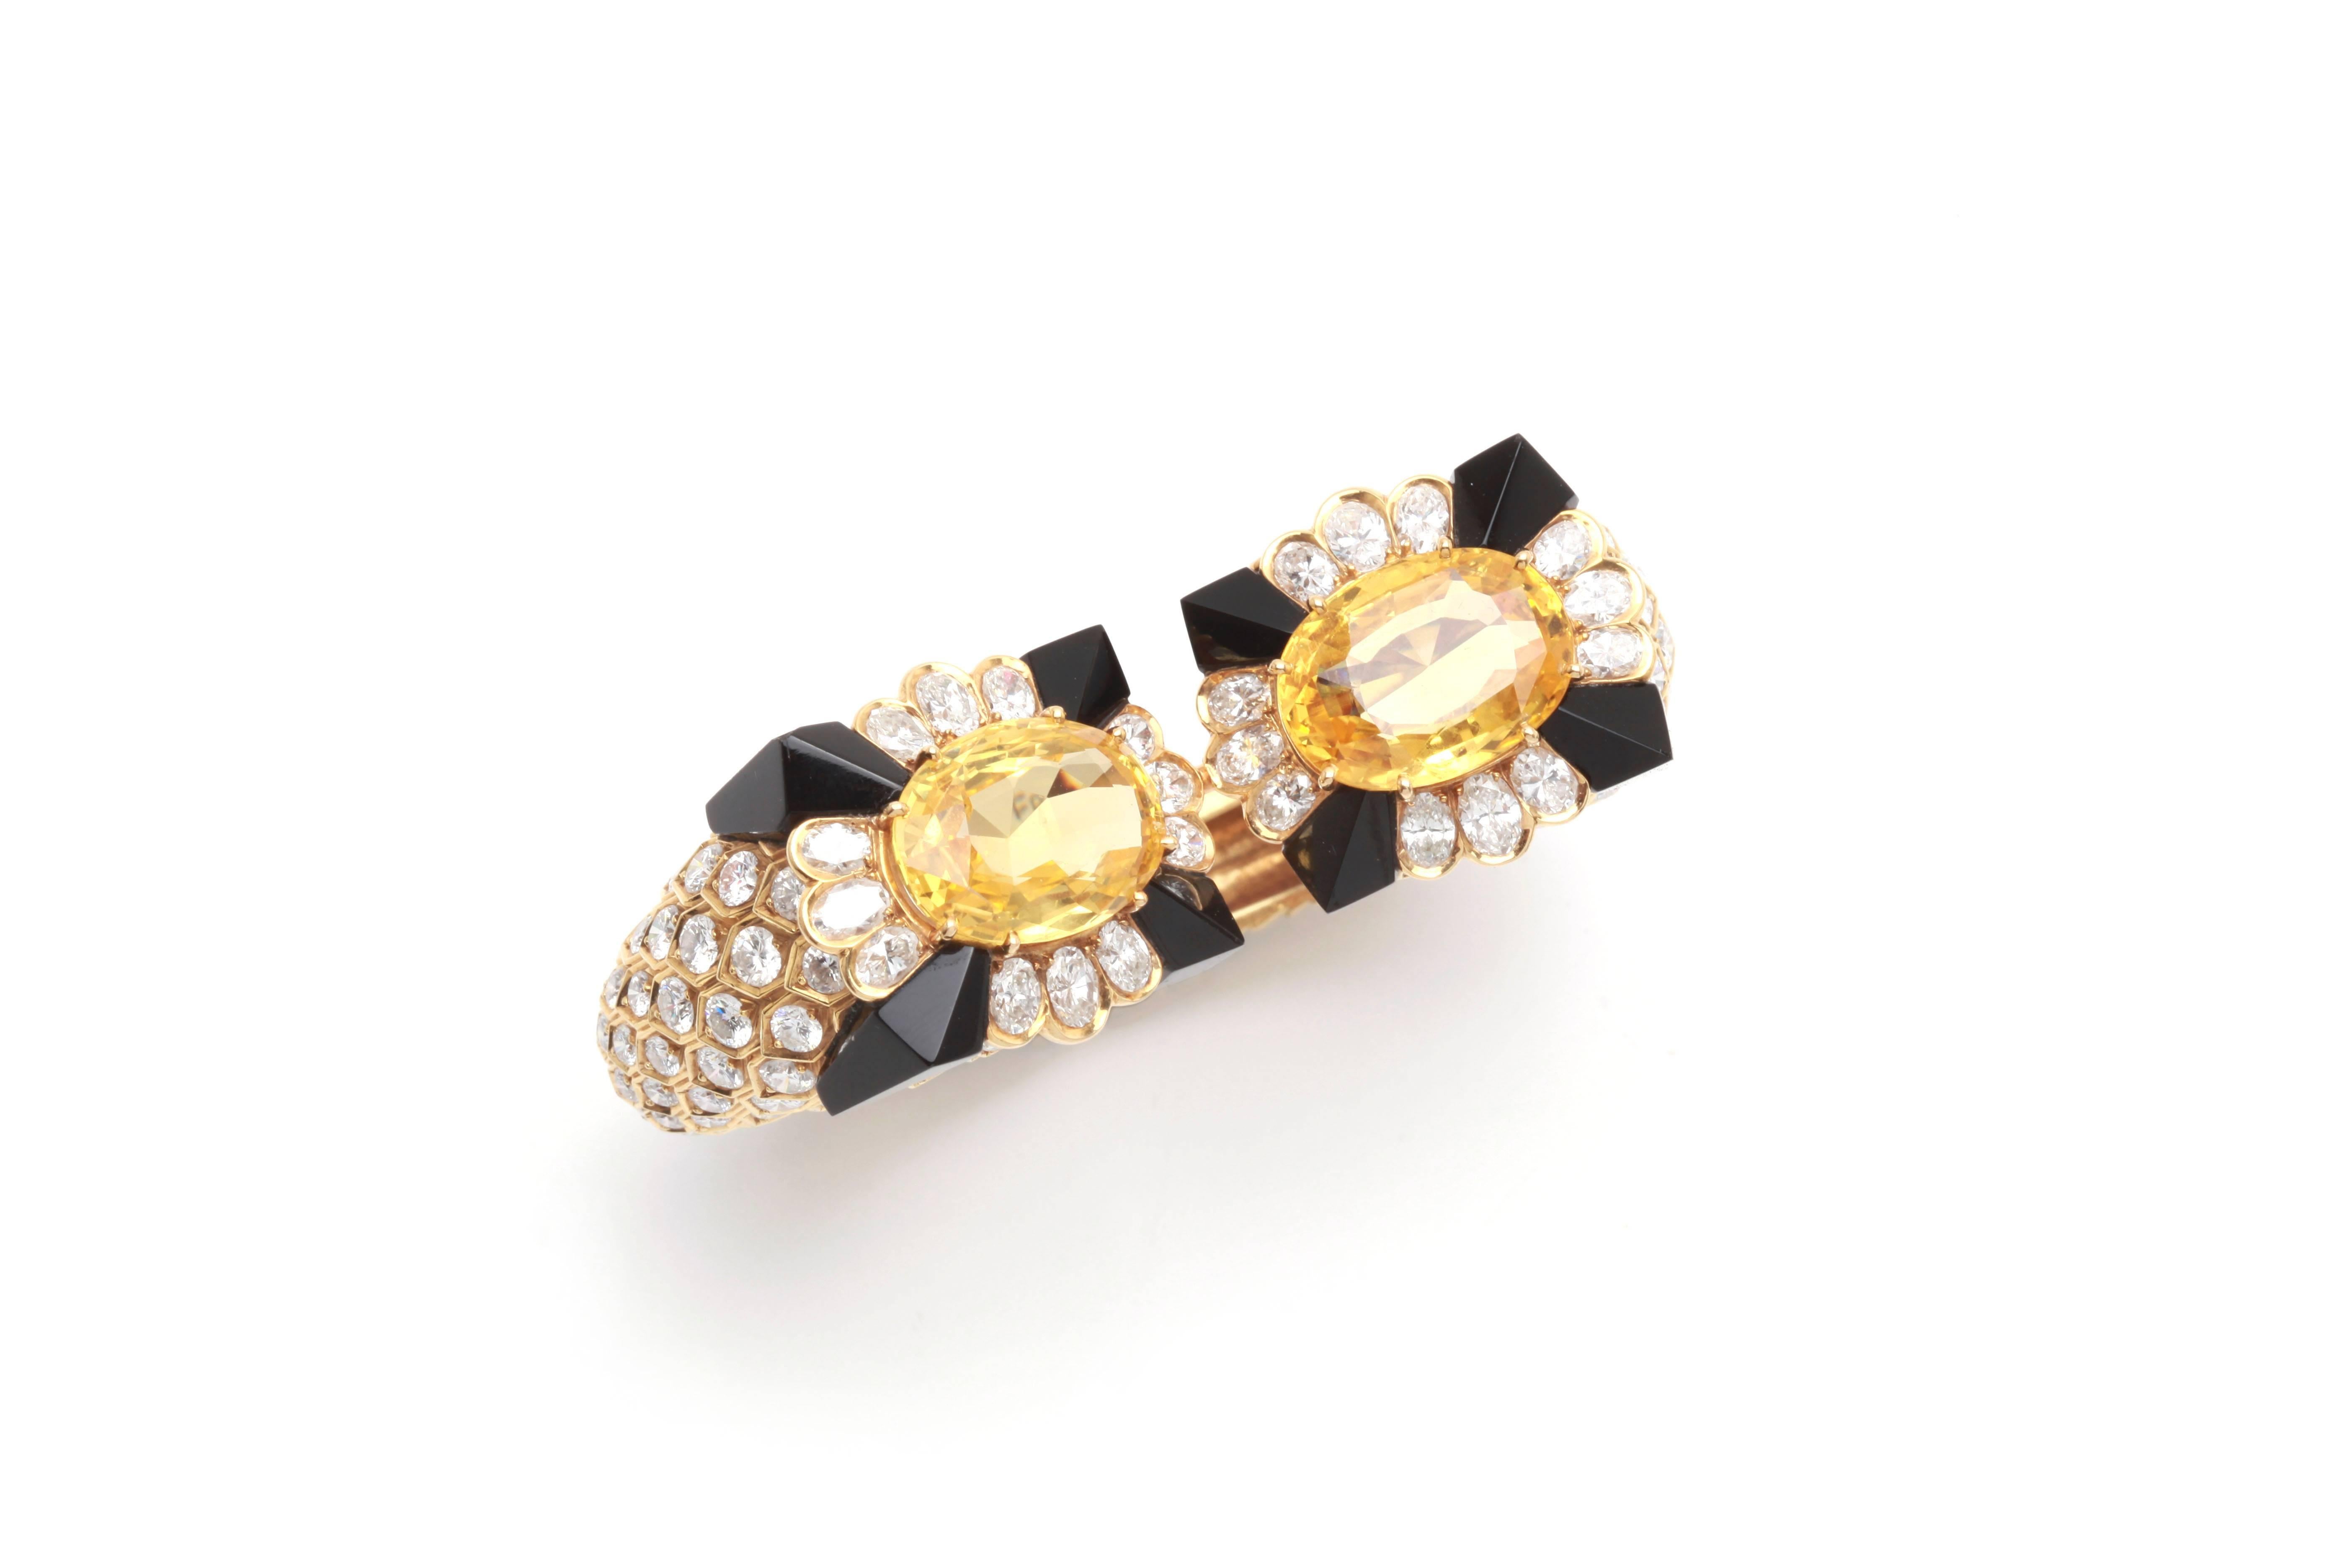 A superb bracelet by esteemed French jeweler Fred, showcasing two large cushion shaped yellow sapphires, mounted on a scaled 18kt yellow gold cuff, highlighted with diamonds and onyx elements. Circa 1970.